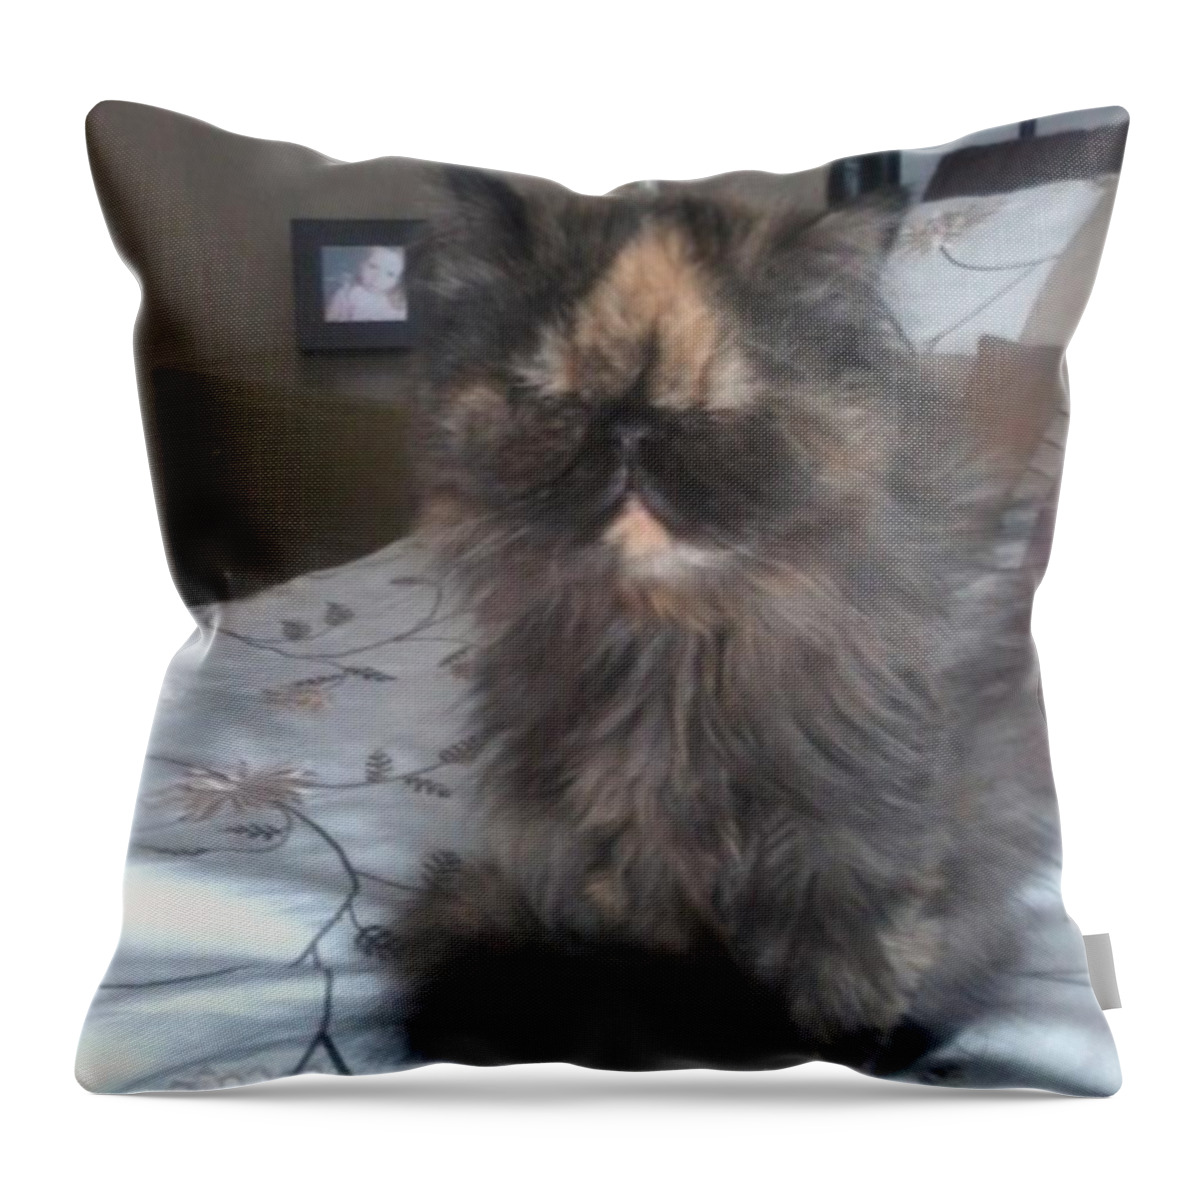 Grumpy Cat Throw Pillow featuring the photograph I Don't Like Mornings by Shona Walker